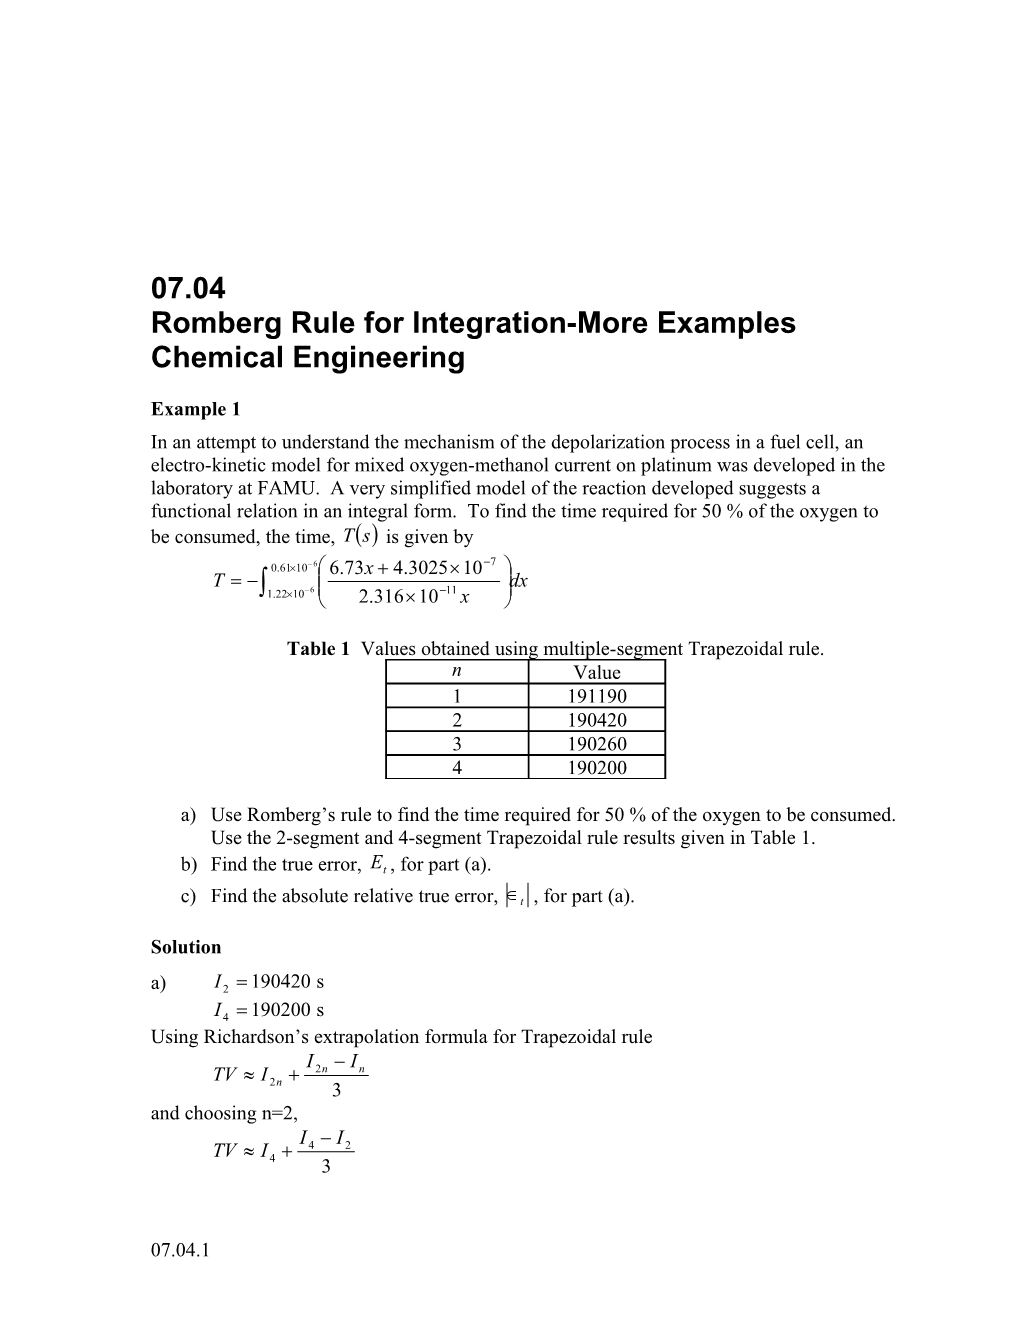 Romberg Rule for Integration-More Examples: Chemical Engineering